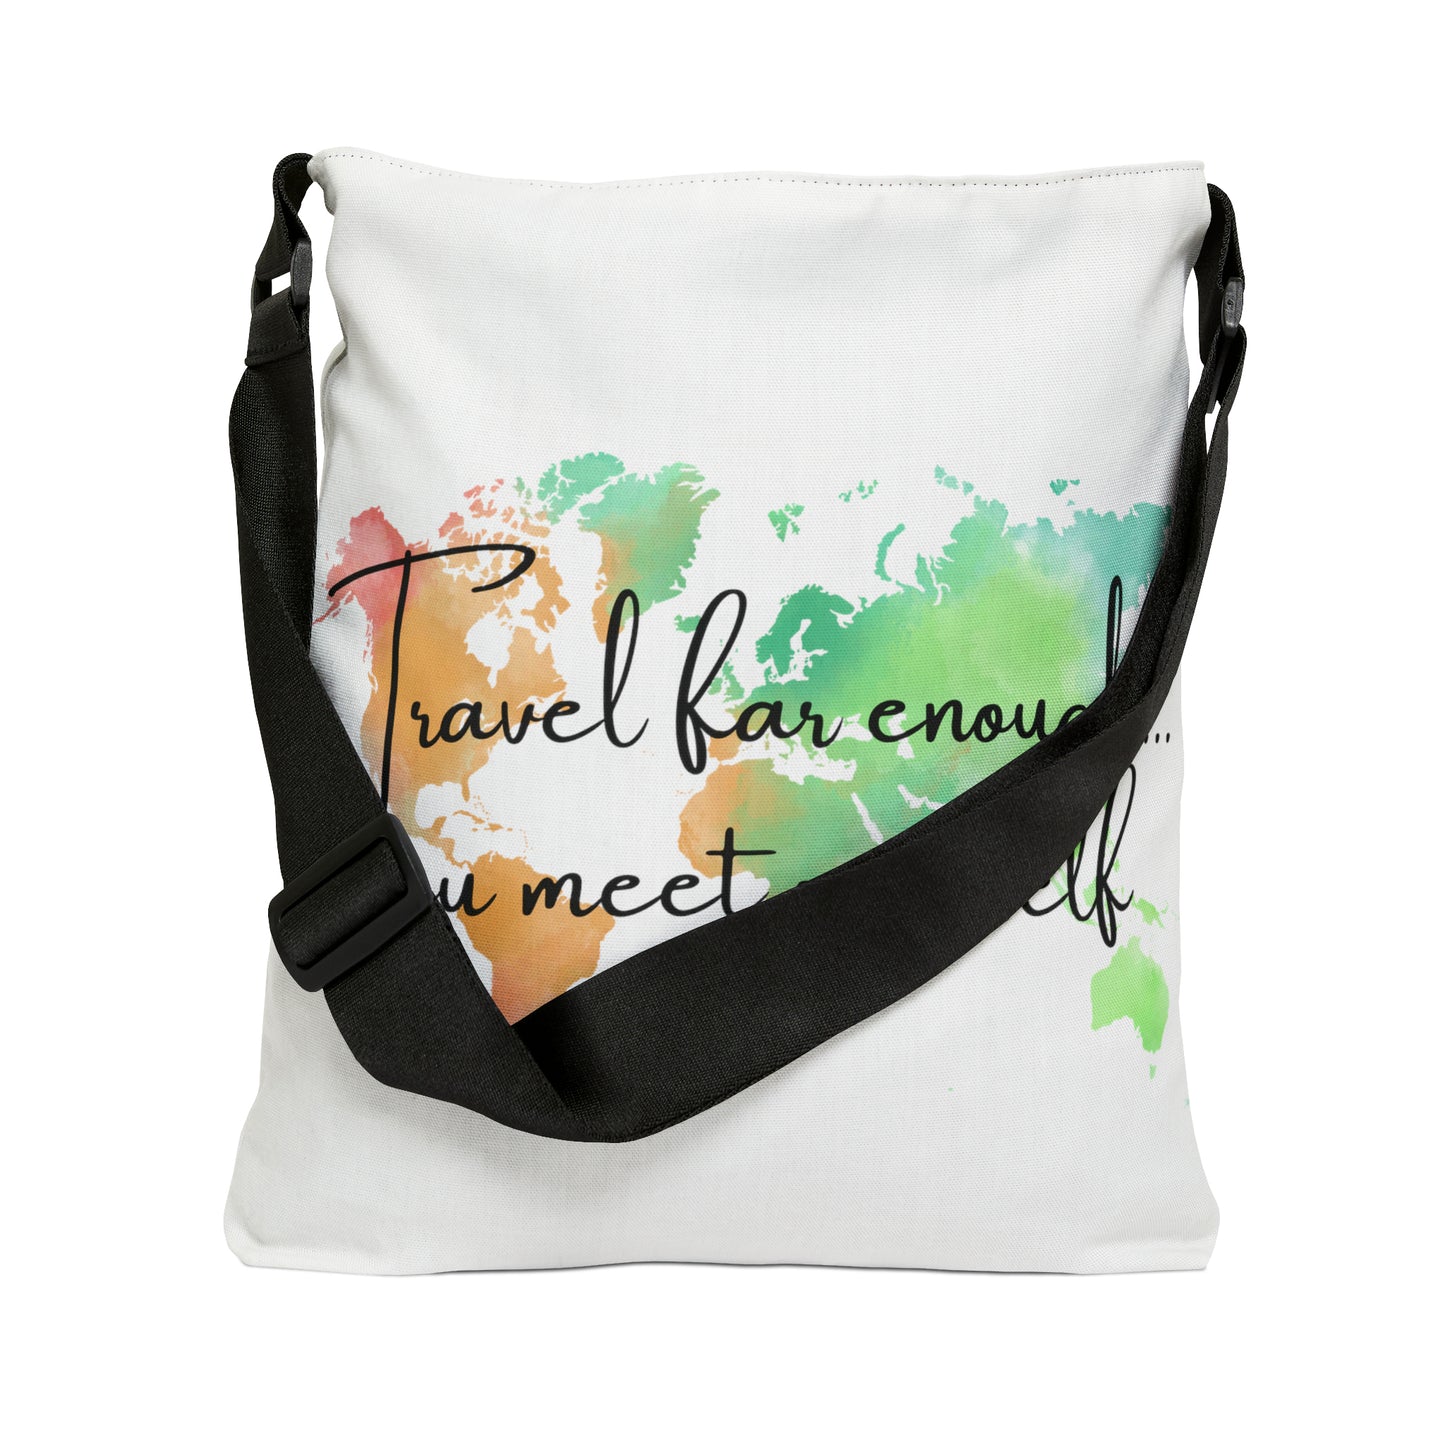 Travel Inspiration Tote Bag w/ Watercolor World Map